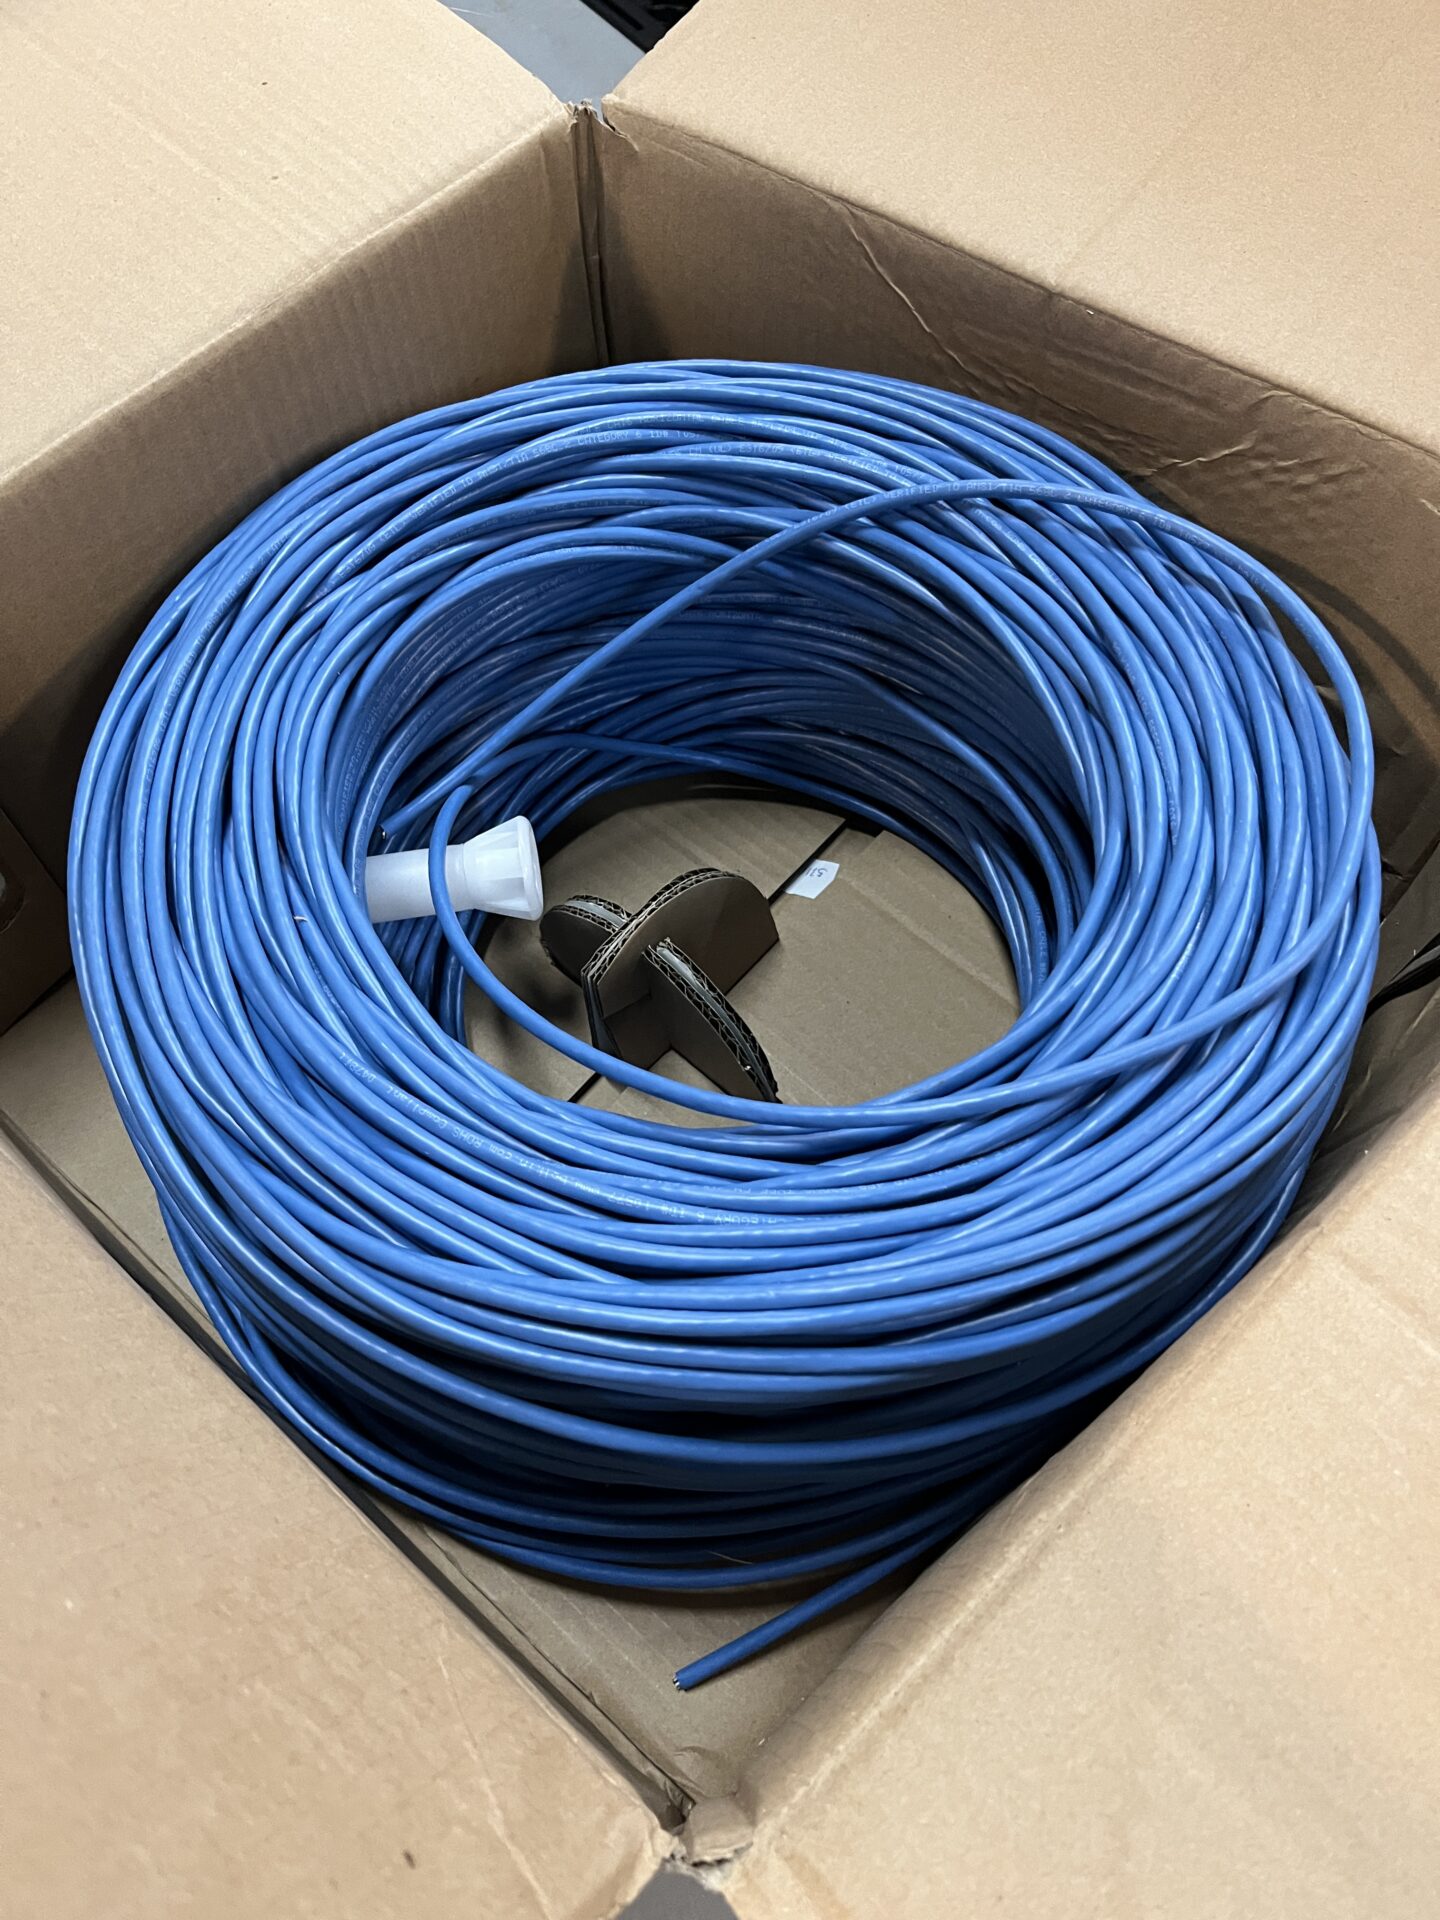 CAT6 Cable